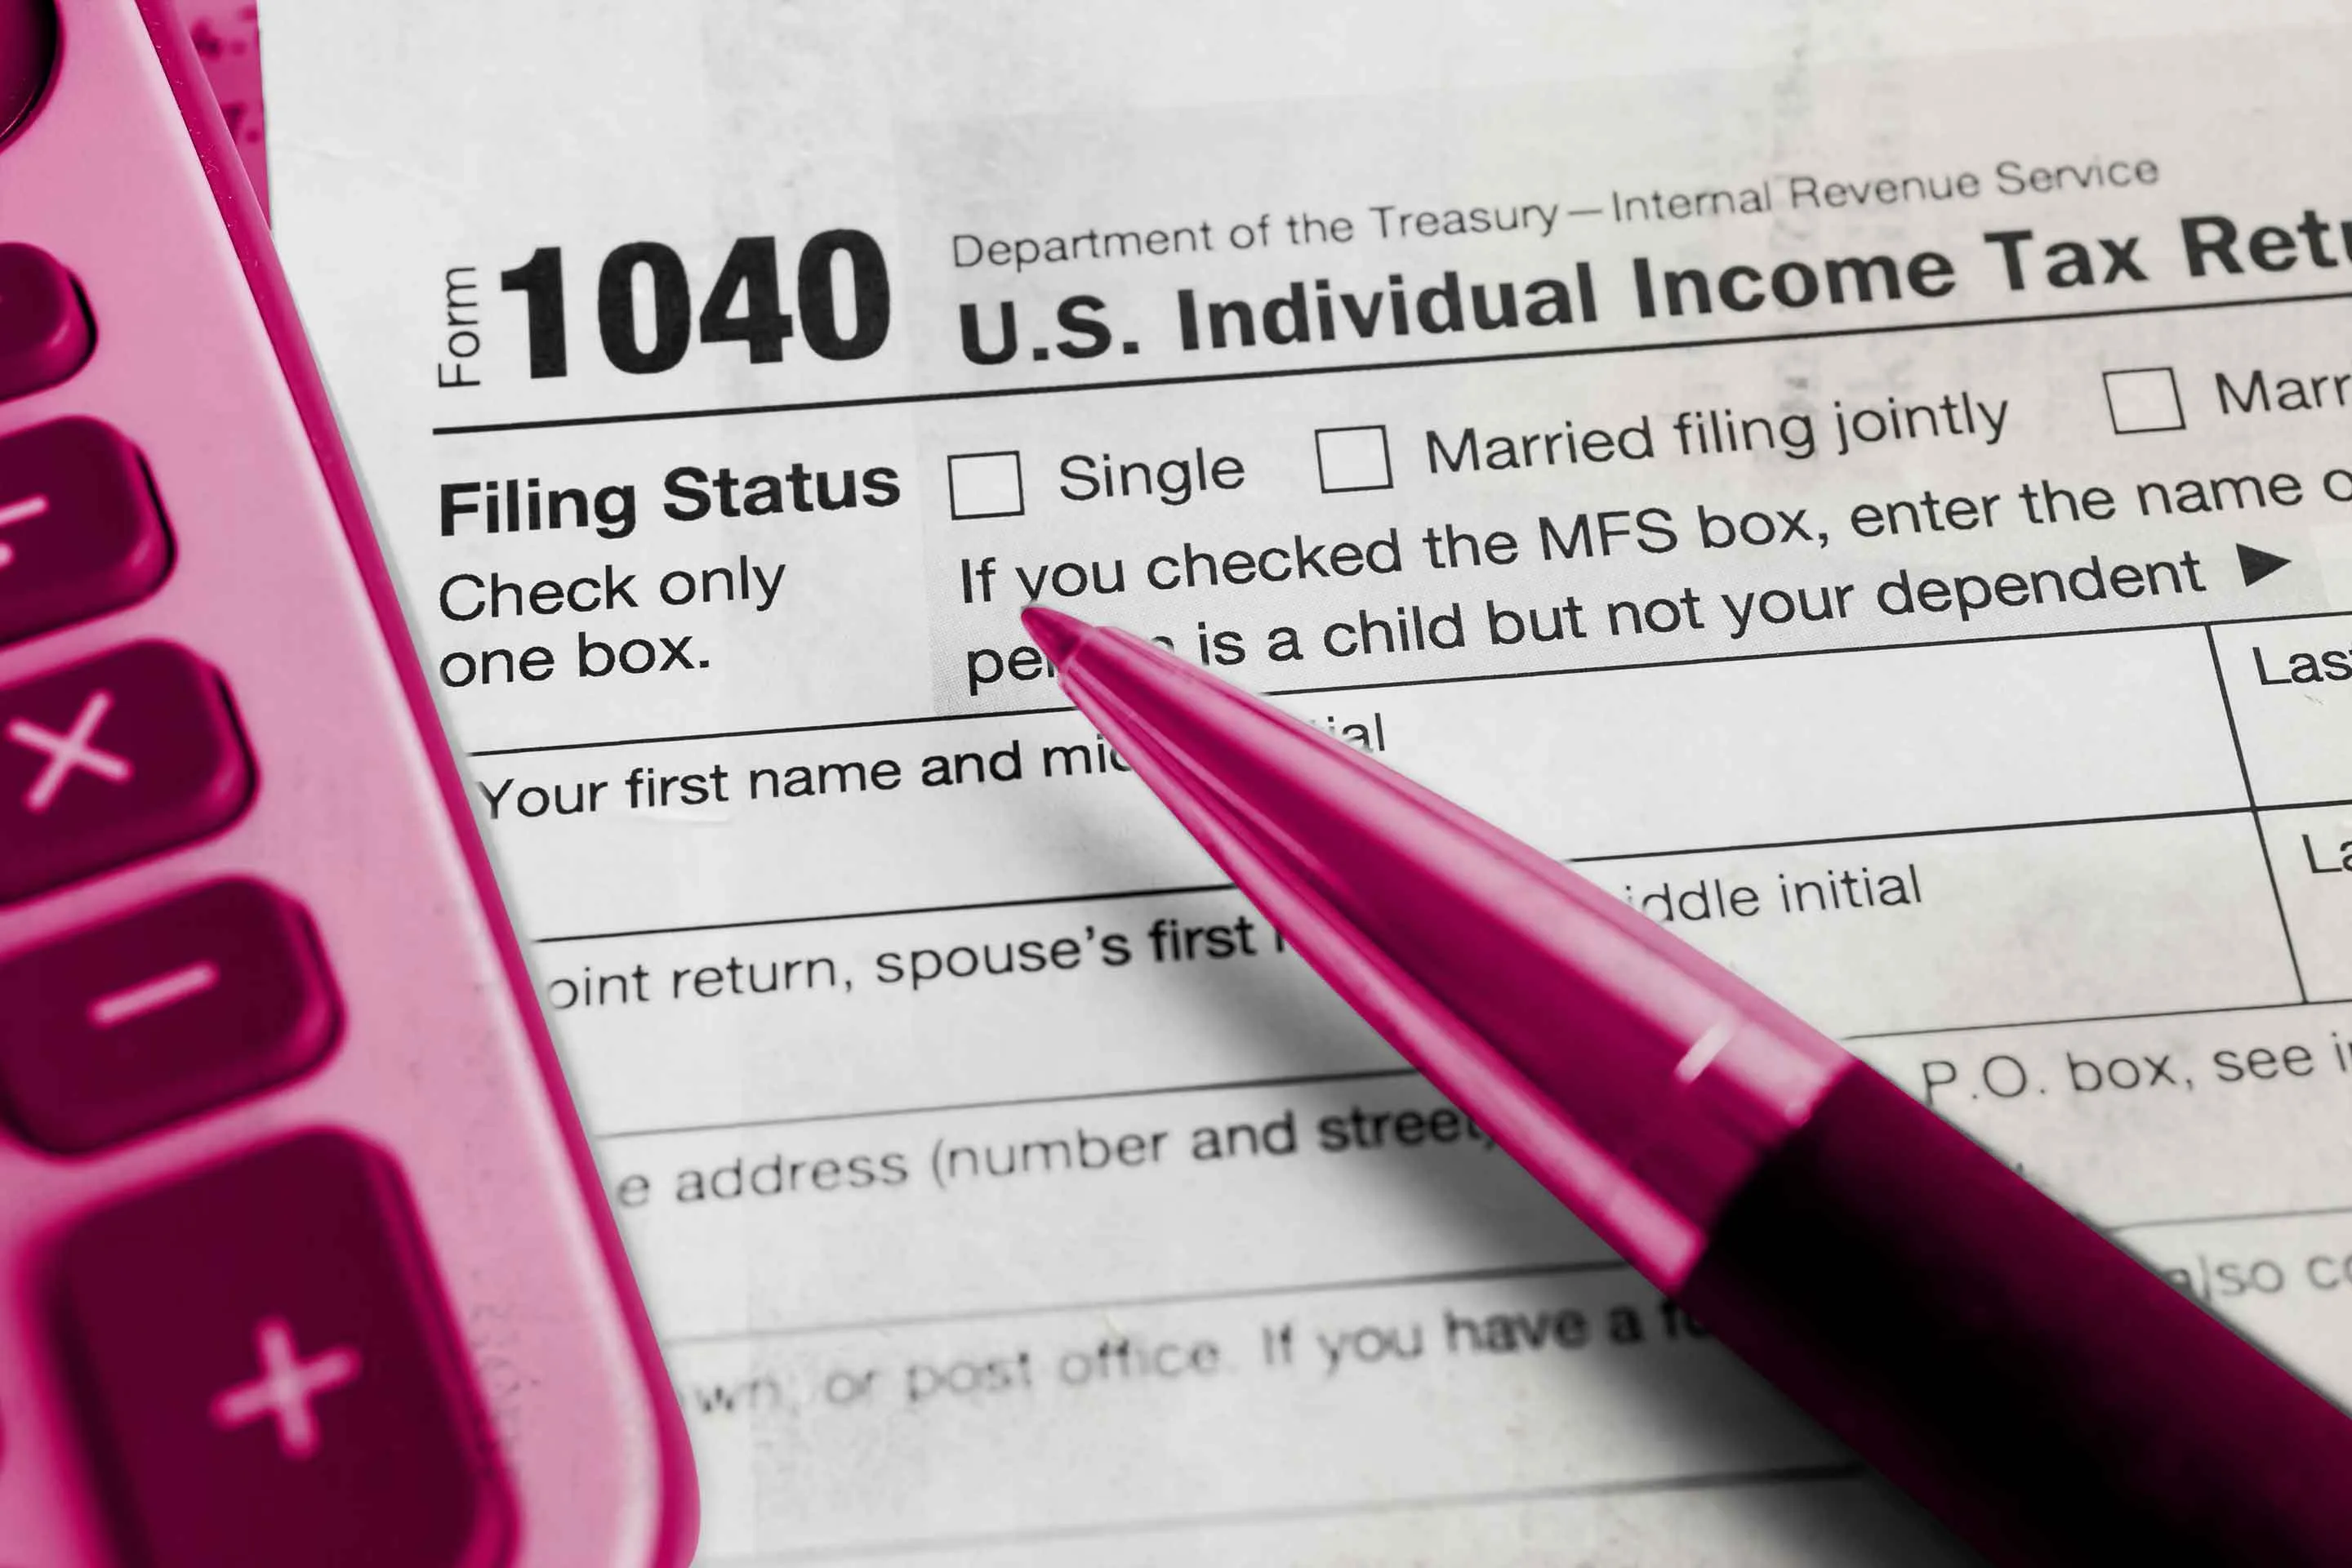 How Big Will Your Tax Refund Be? Many Taxpayers Have No Idea